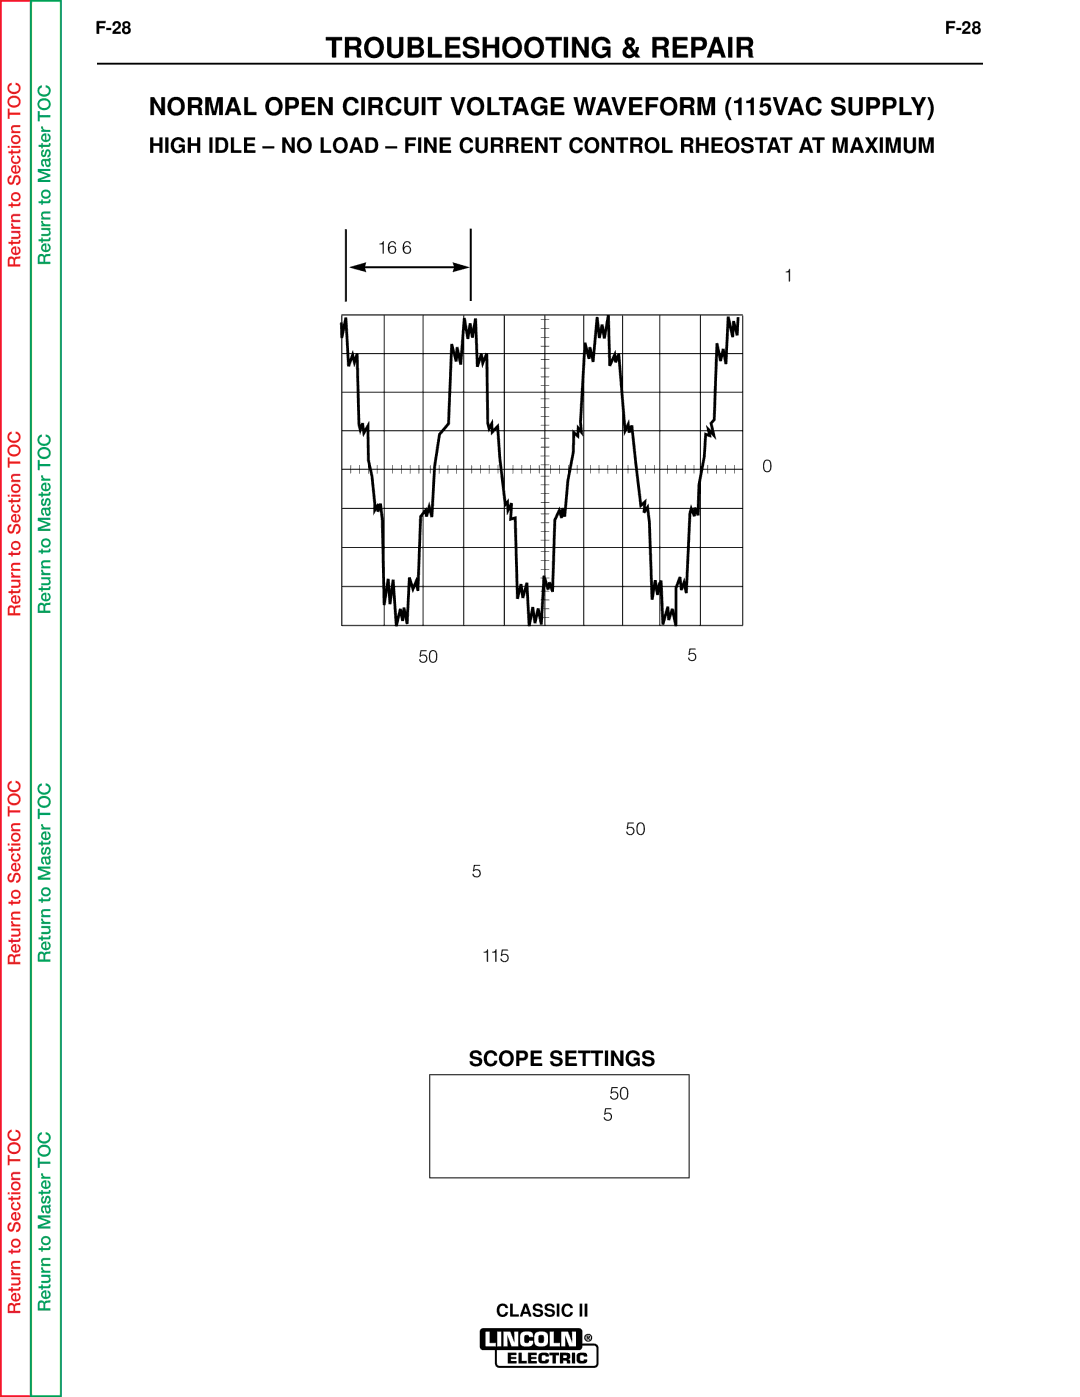 Lincoln Electric SVM125-A service manual Normal Open Circuit Voltage Waveform 115VAC Supply, Scope Settings 